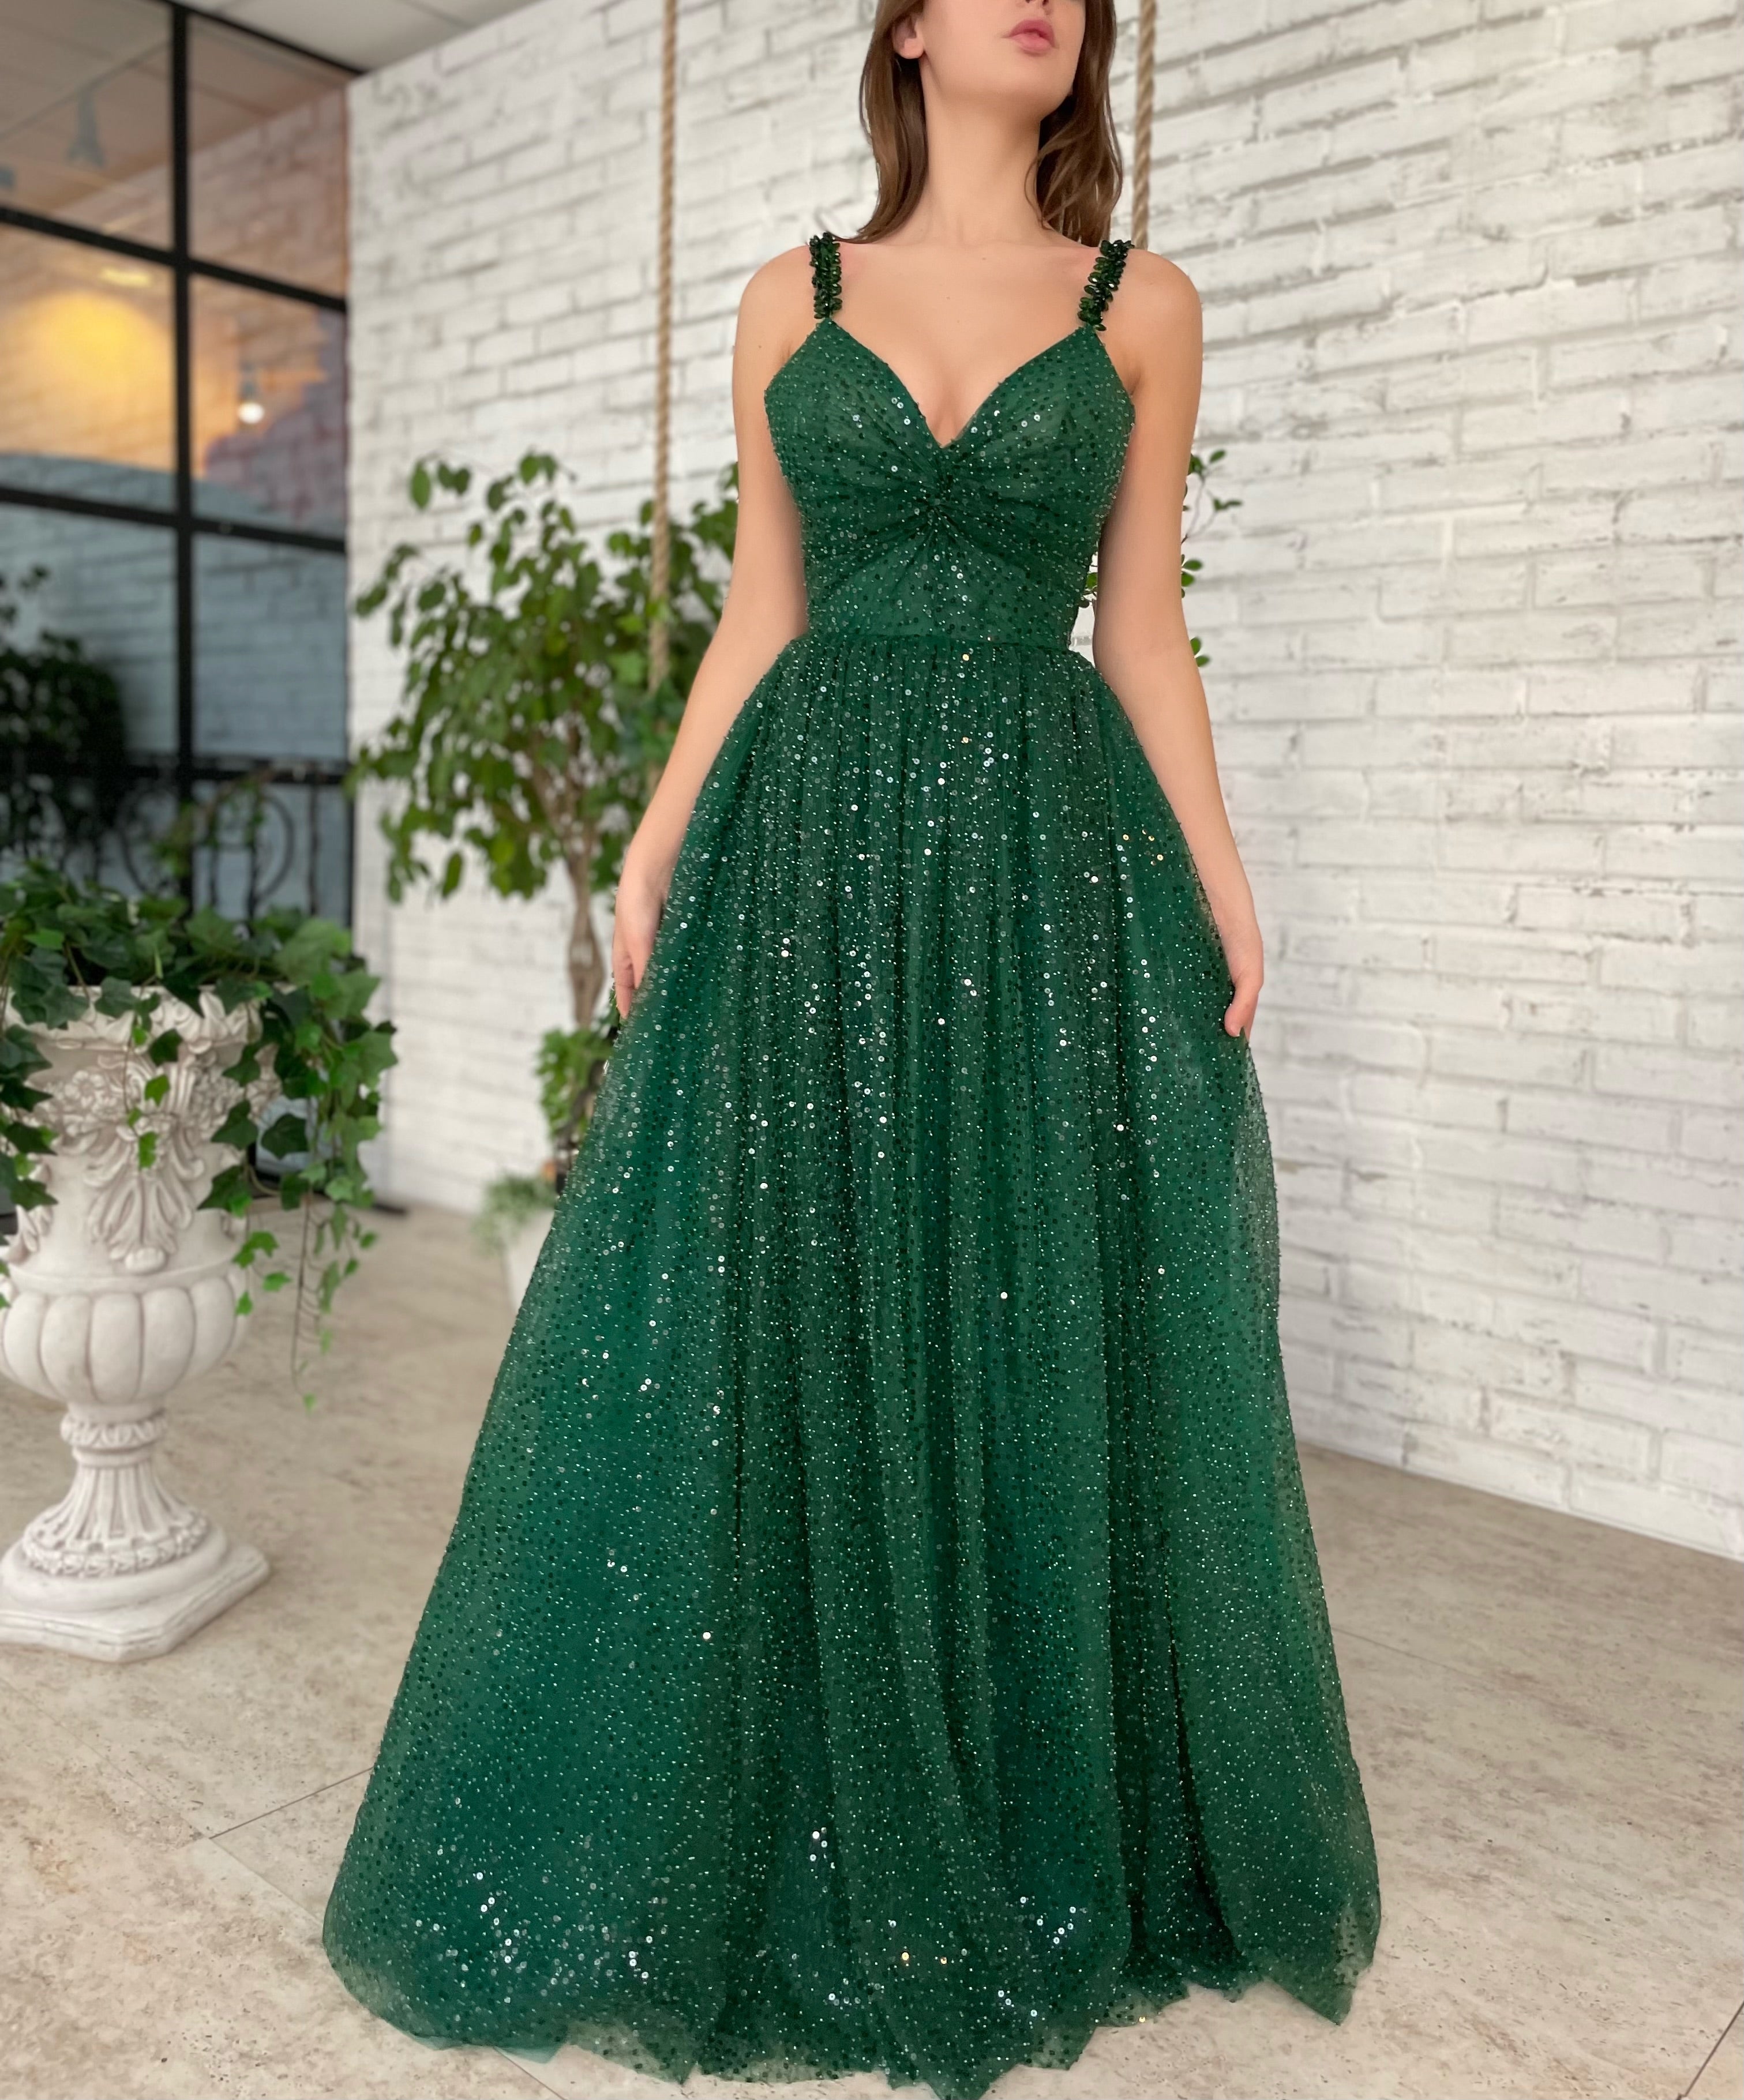 Green A-Line dress with spaghetti straps and embroidery